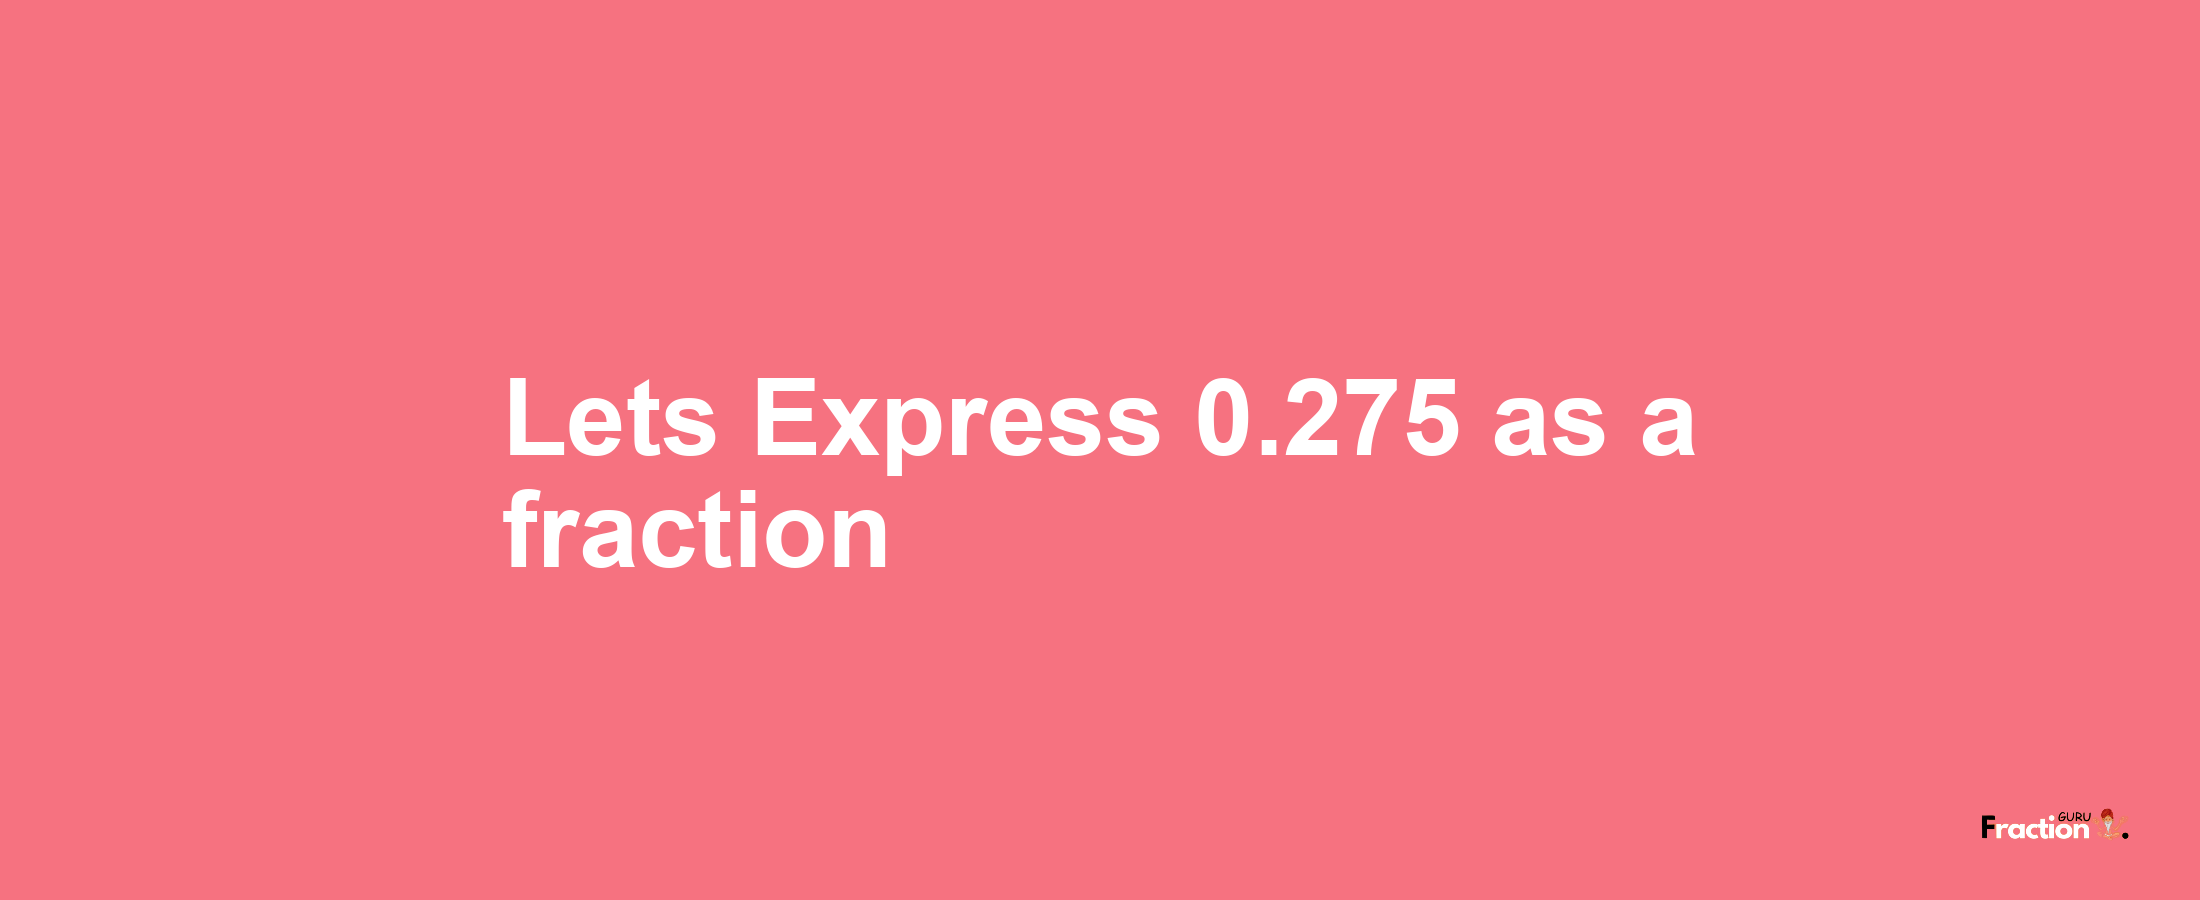 Lets Express 0.275 as afraction